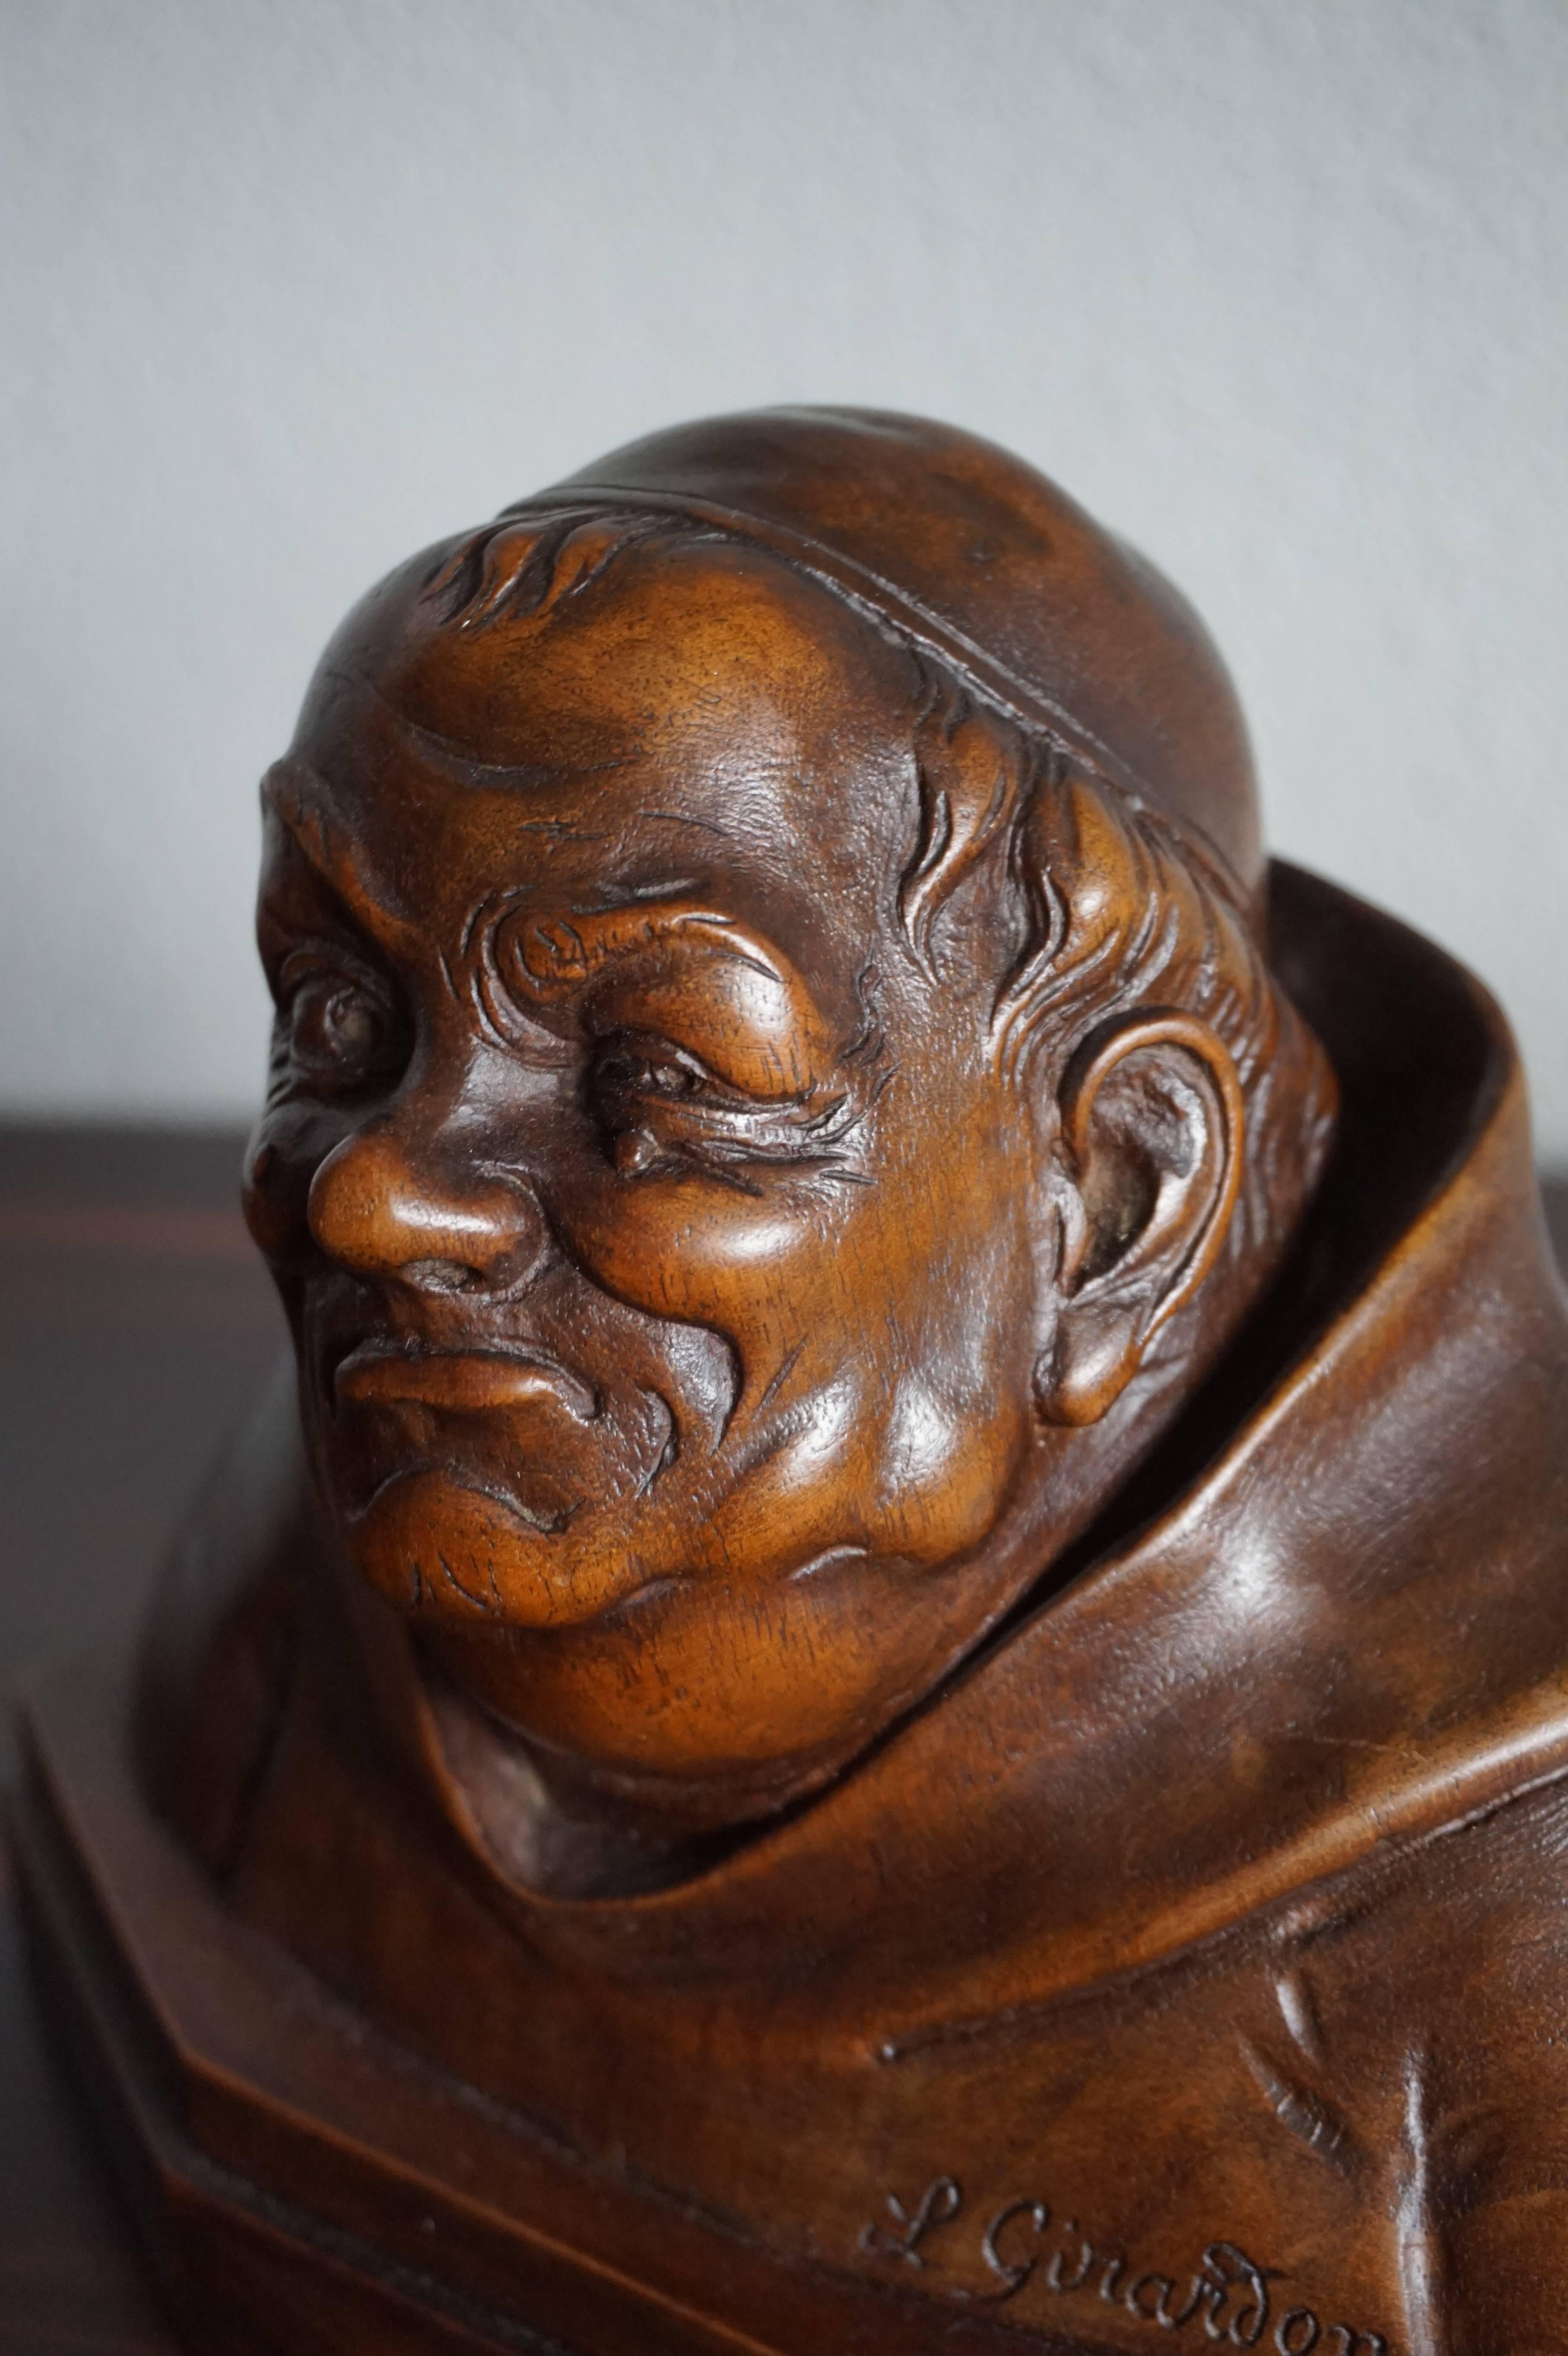 Rare and top quality carved pair of monk busts by L. Girardon.

Nowadays, anyone capable of making a detailed drawing of a human face is considered an artist (and rightly so). For a person to be able to carve detailed busts with striking faces out